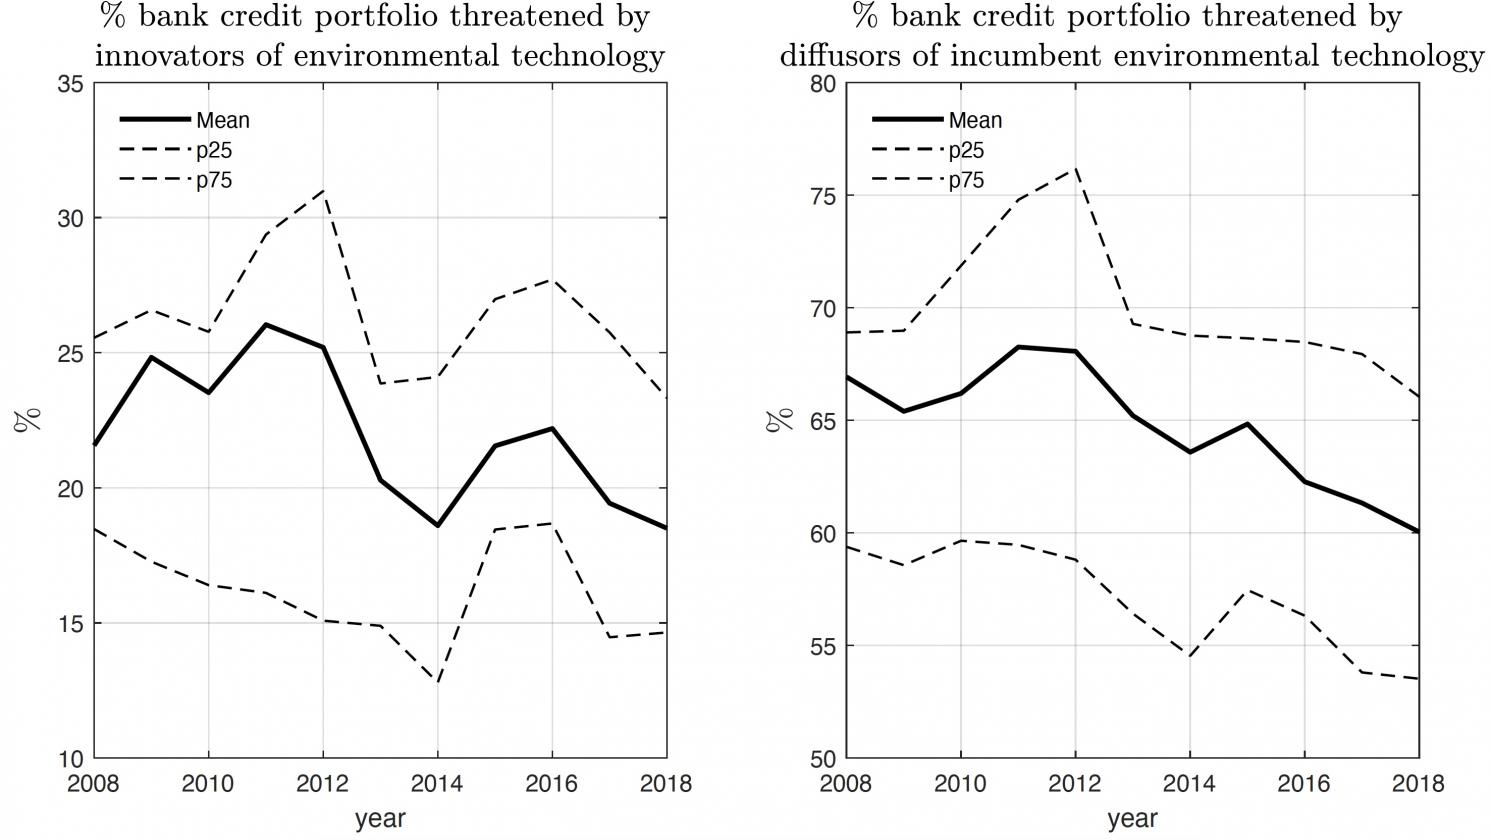 Share of banks’ corporate credit portfolio negatively exposed to environmental innovators/diffusors